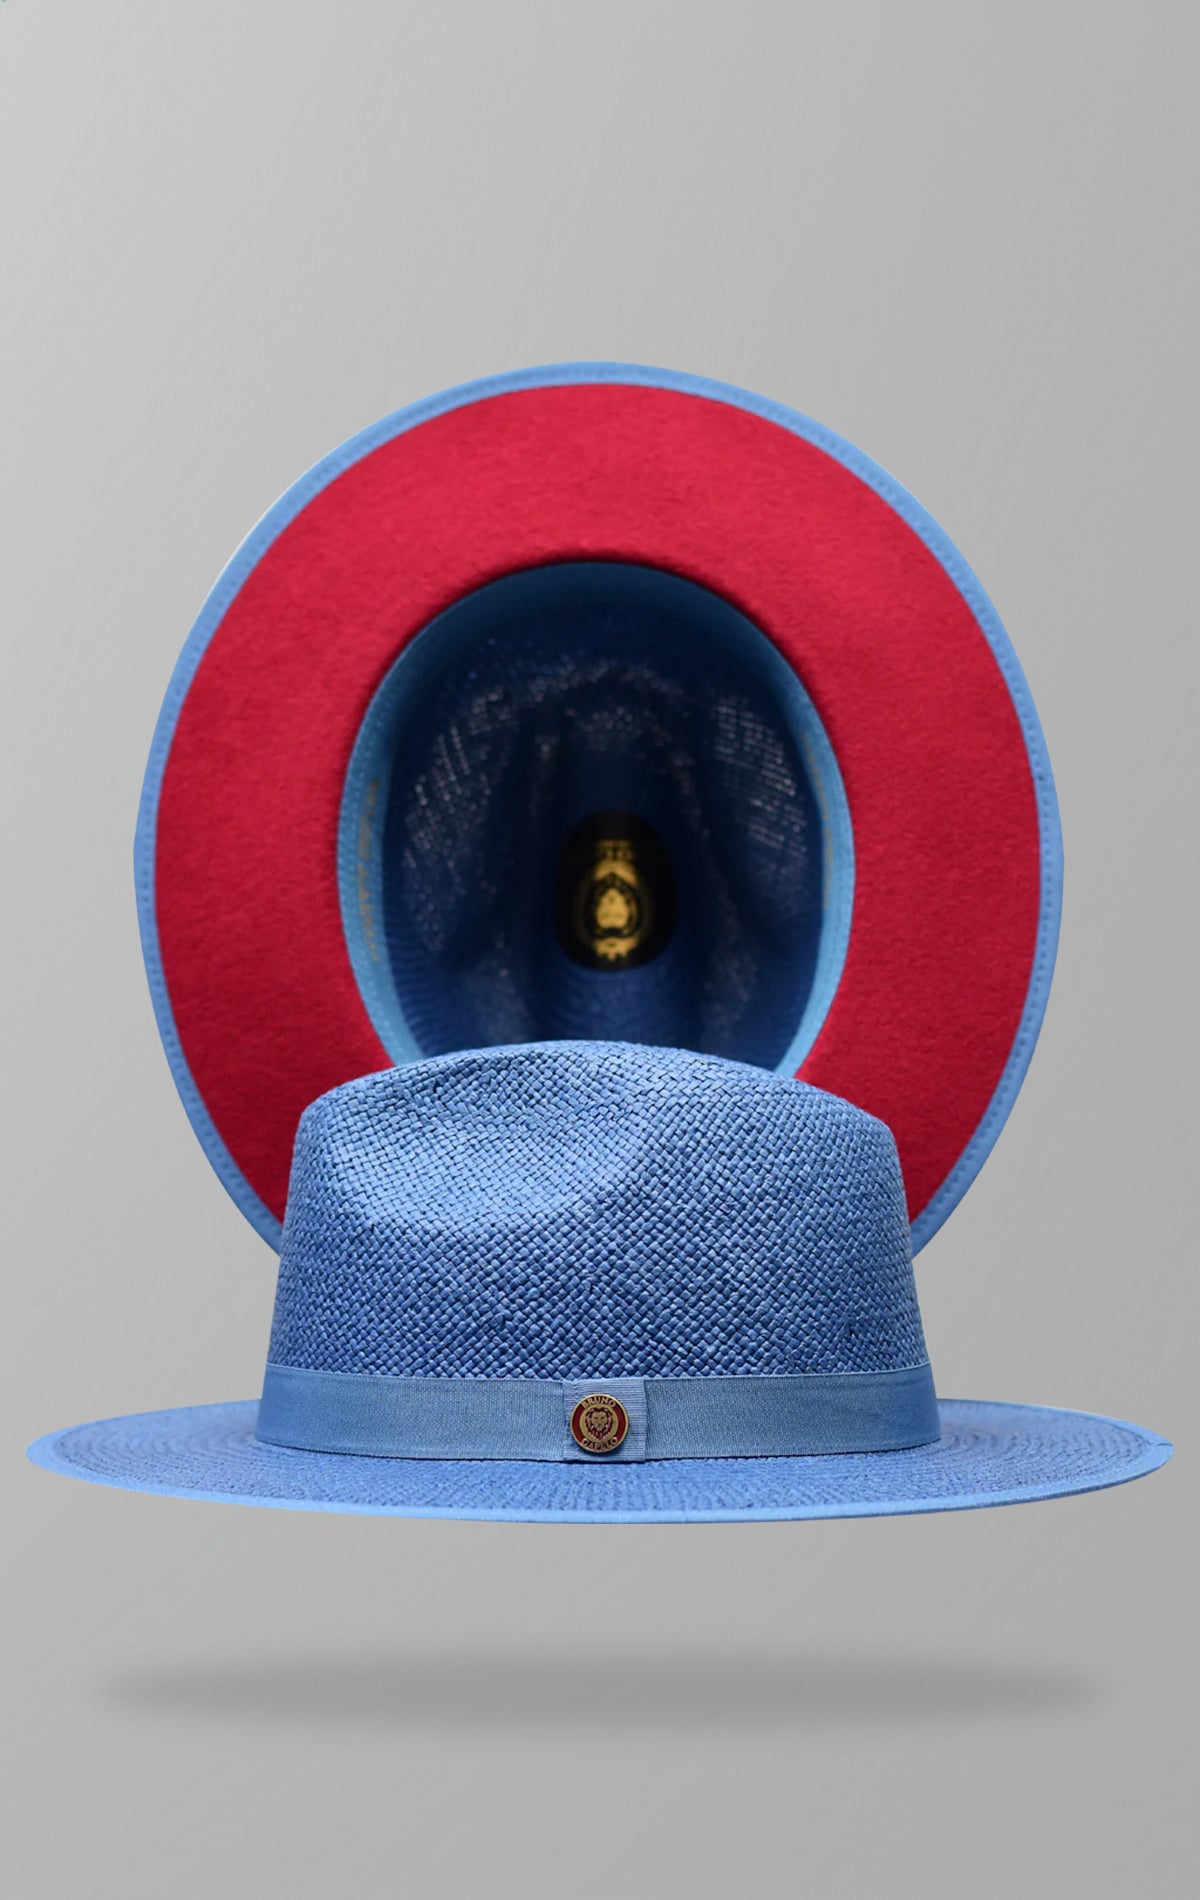 Kingdom limited edition natural straw hat with contrast under brim and 3-inch wide flat brim.